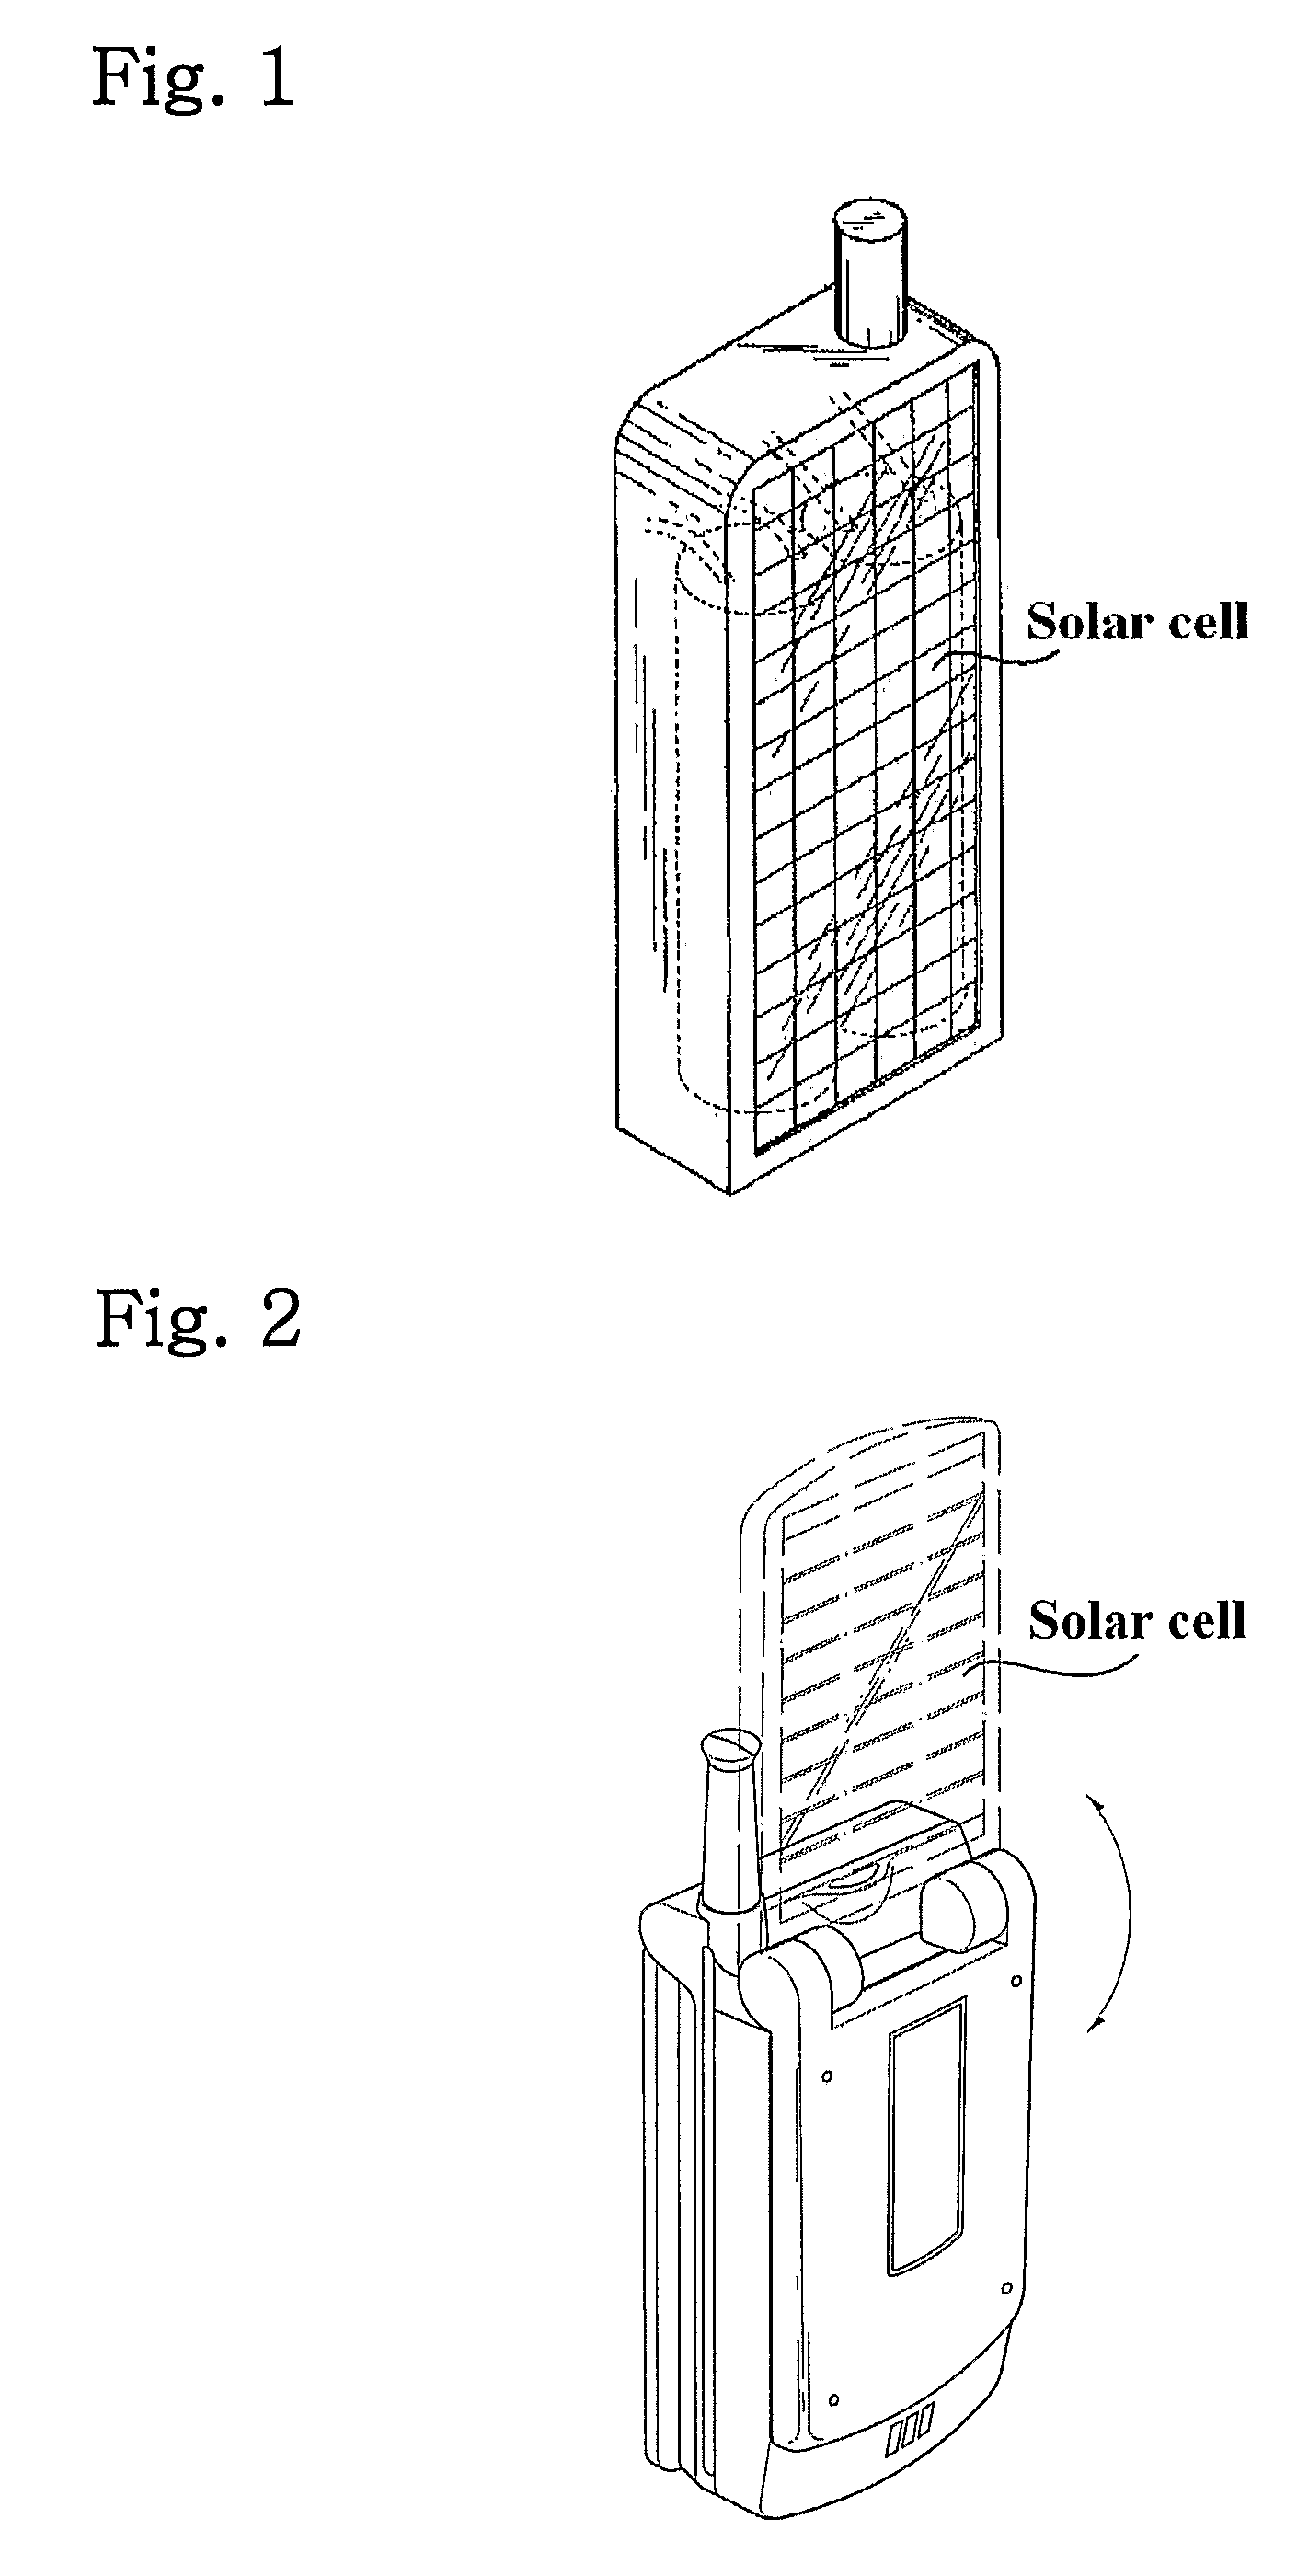 Method and Device for Recharging Using Portable Multi-Voltage Solar Cell